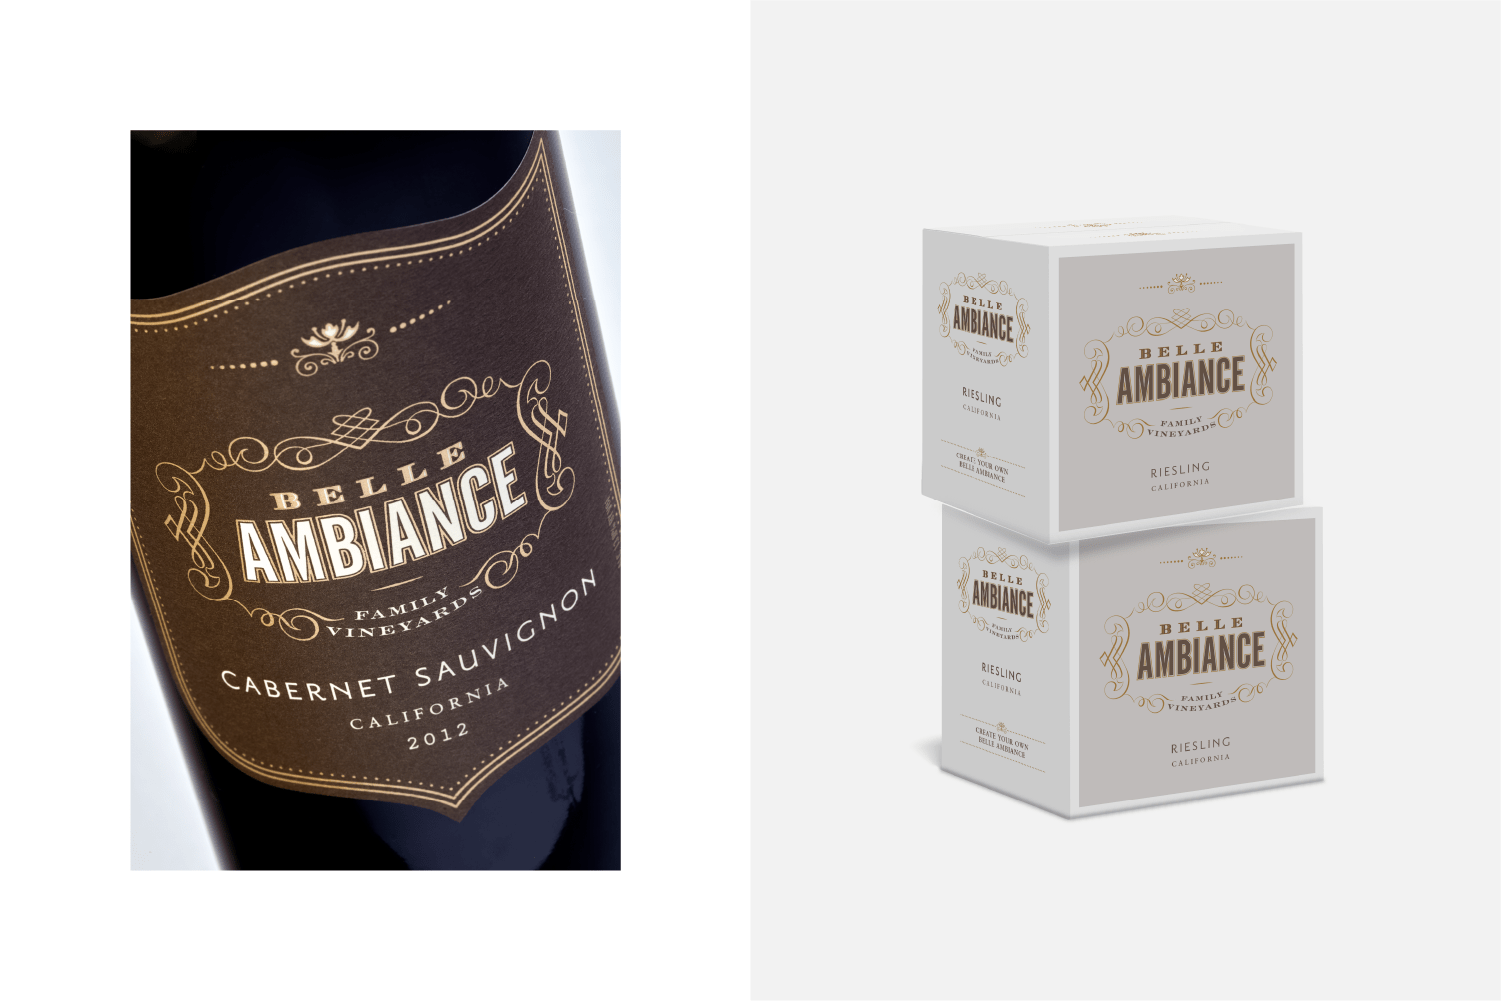 Belle Ambiance Cabernet Savignon and branded shipper cartons. 